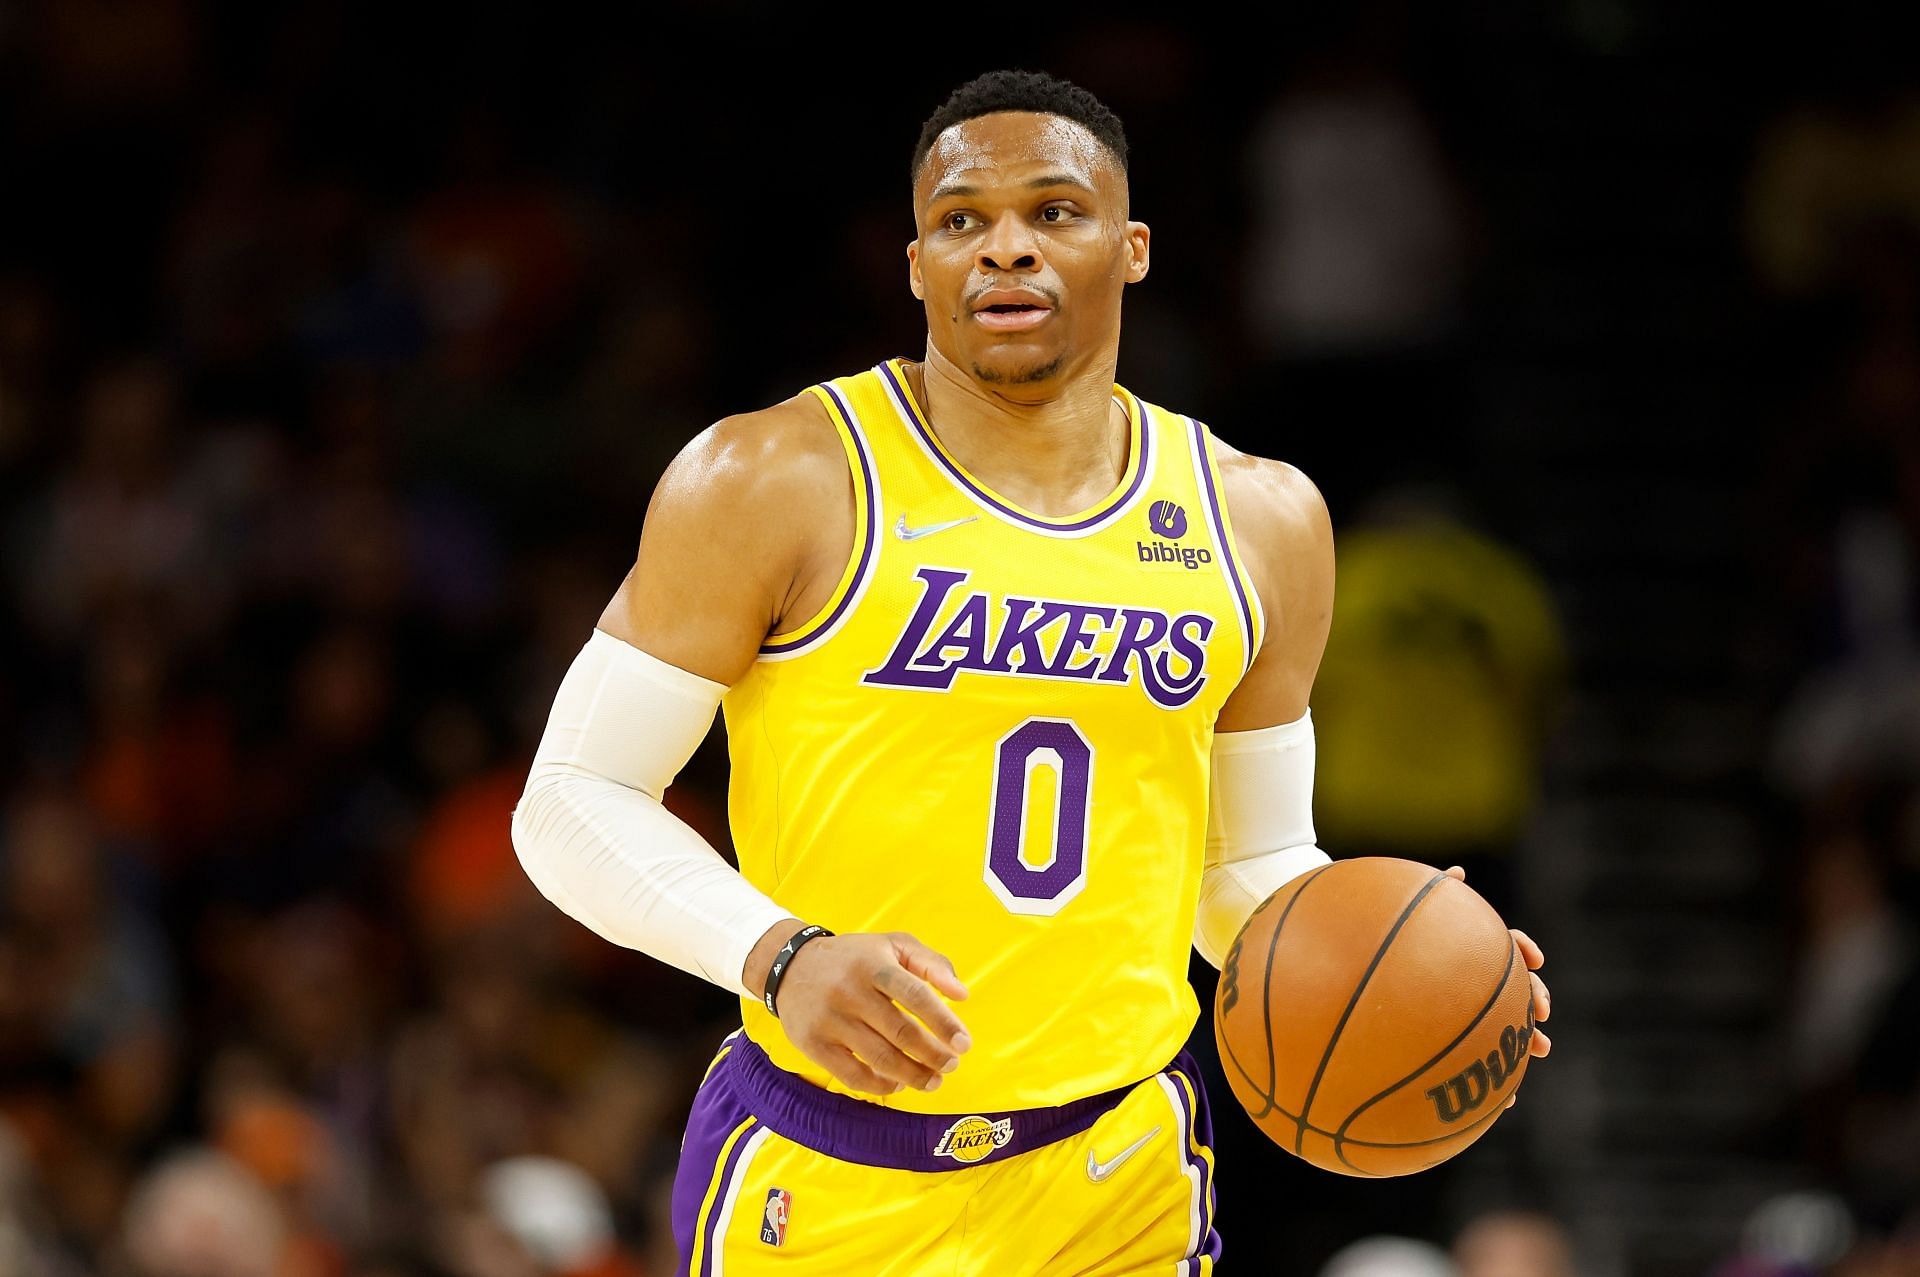 Russell Westbrook of the LA Lakers is a former NBA MVP